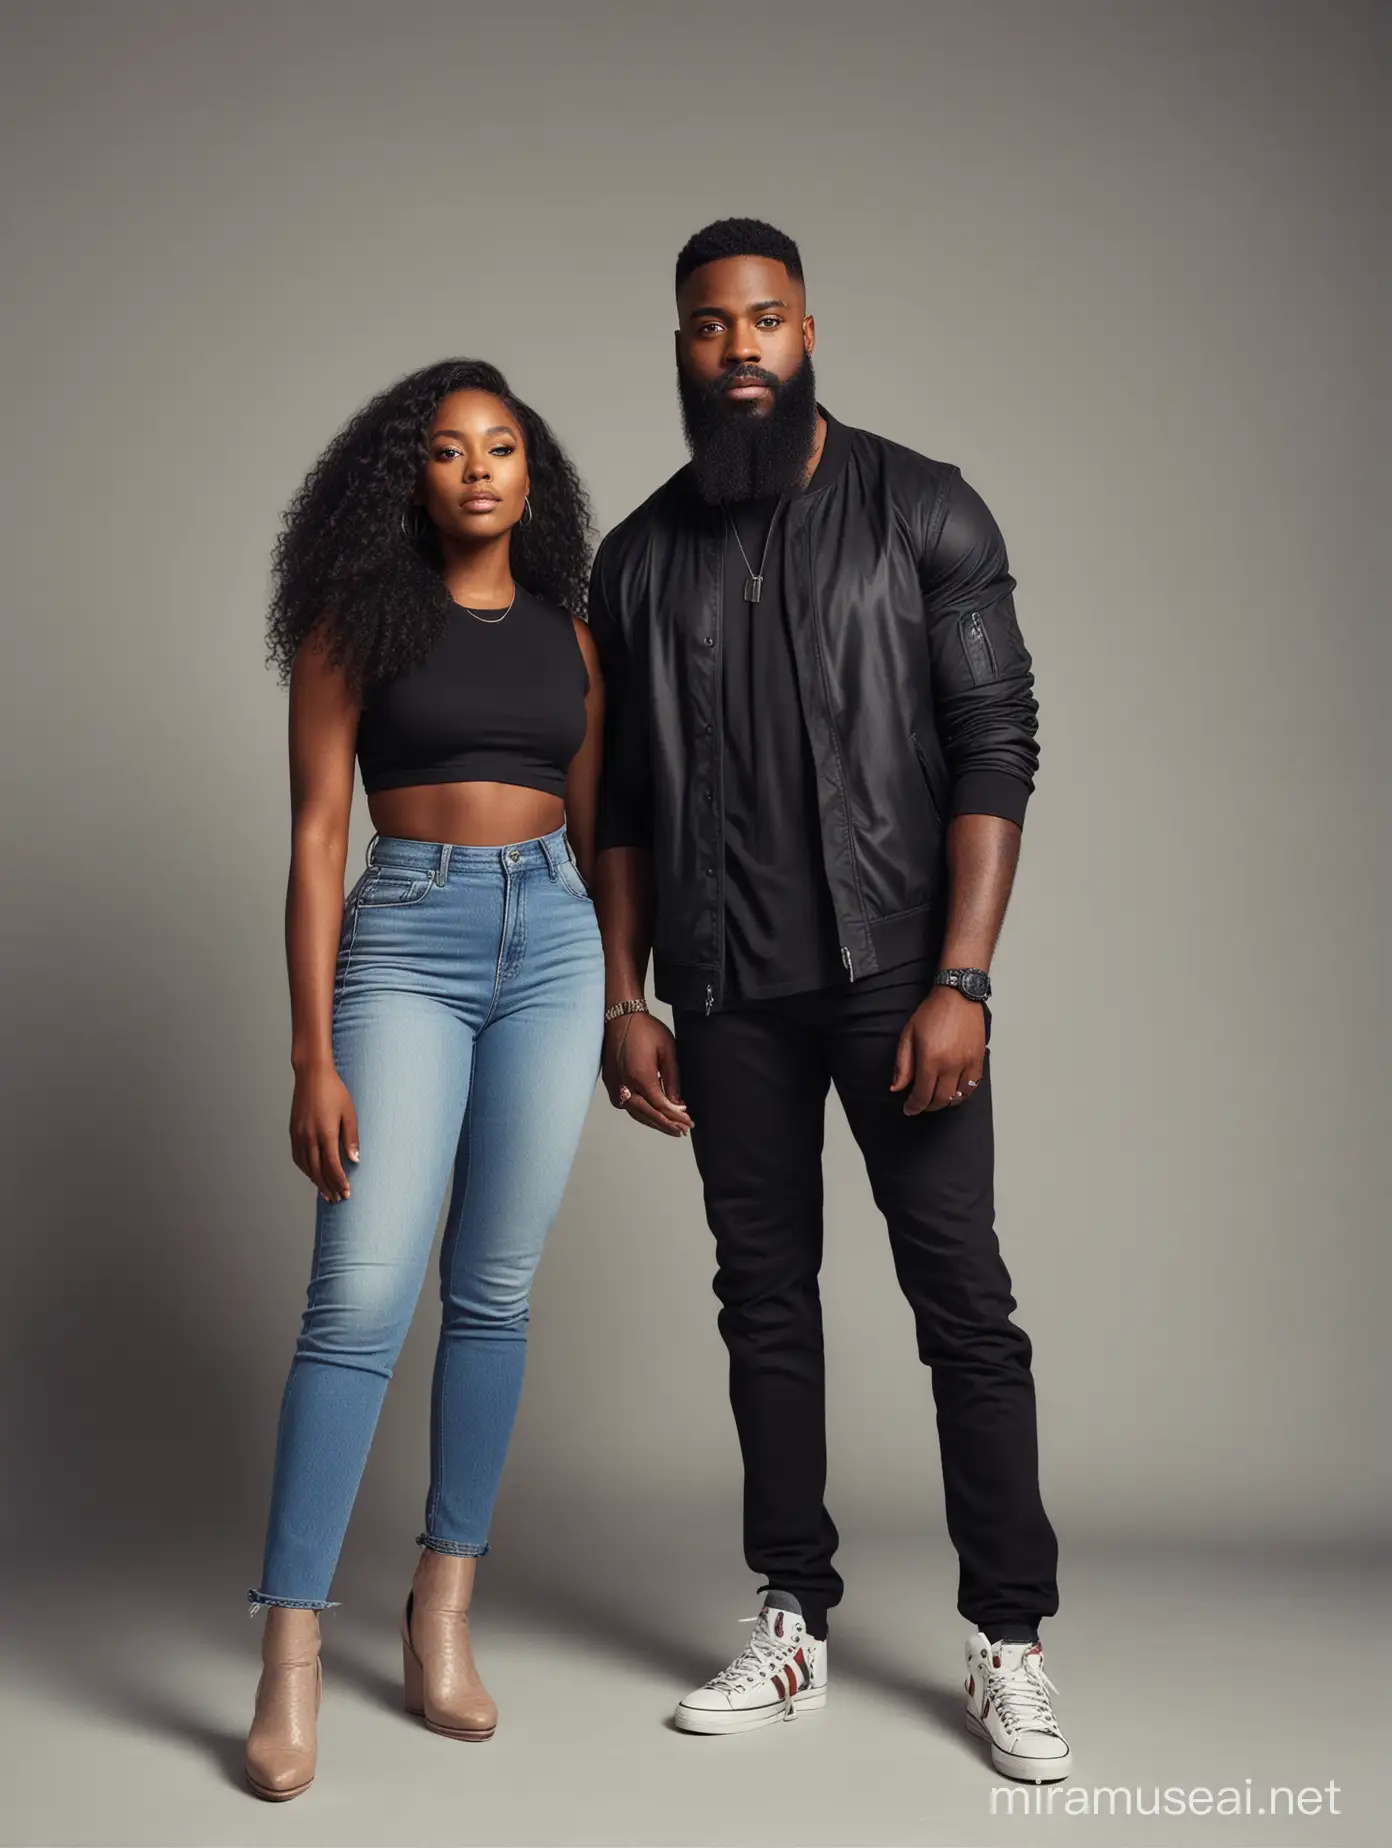 Fashionable Black Couple Poses in Trendy Outfits